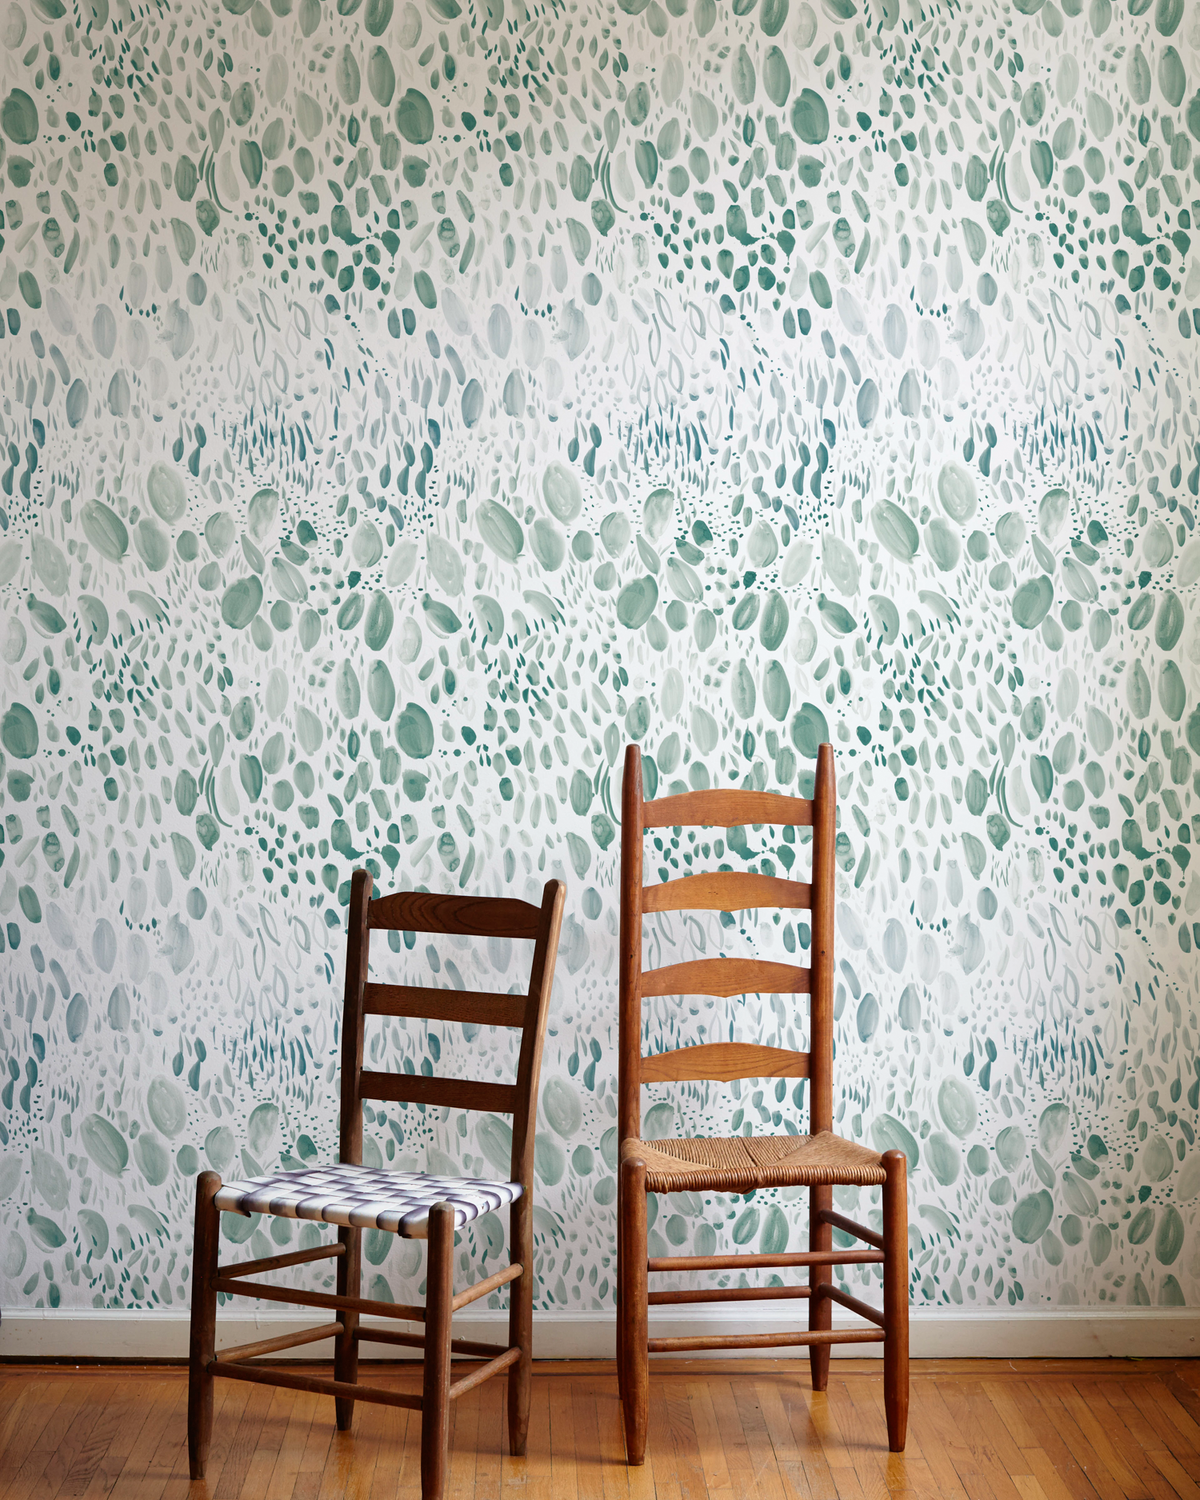 Blooms Wallpaper in Soft Green